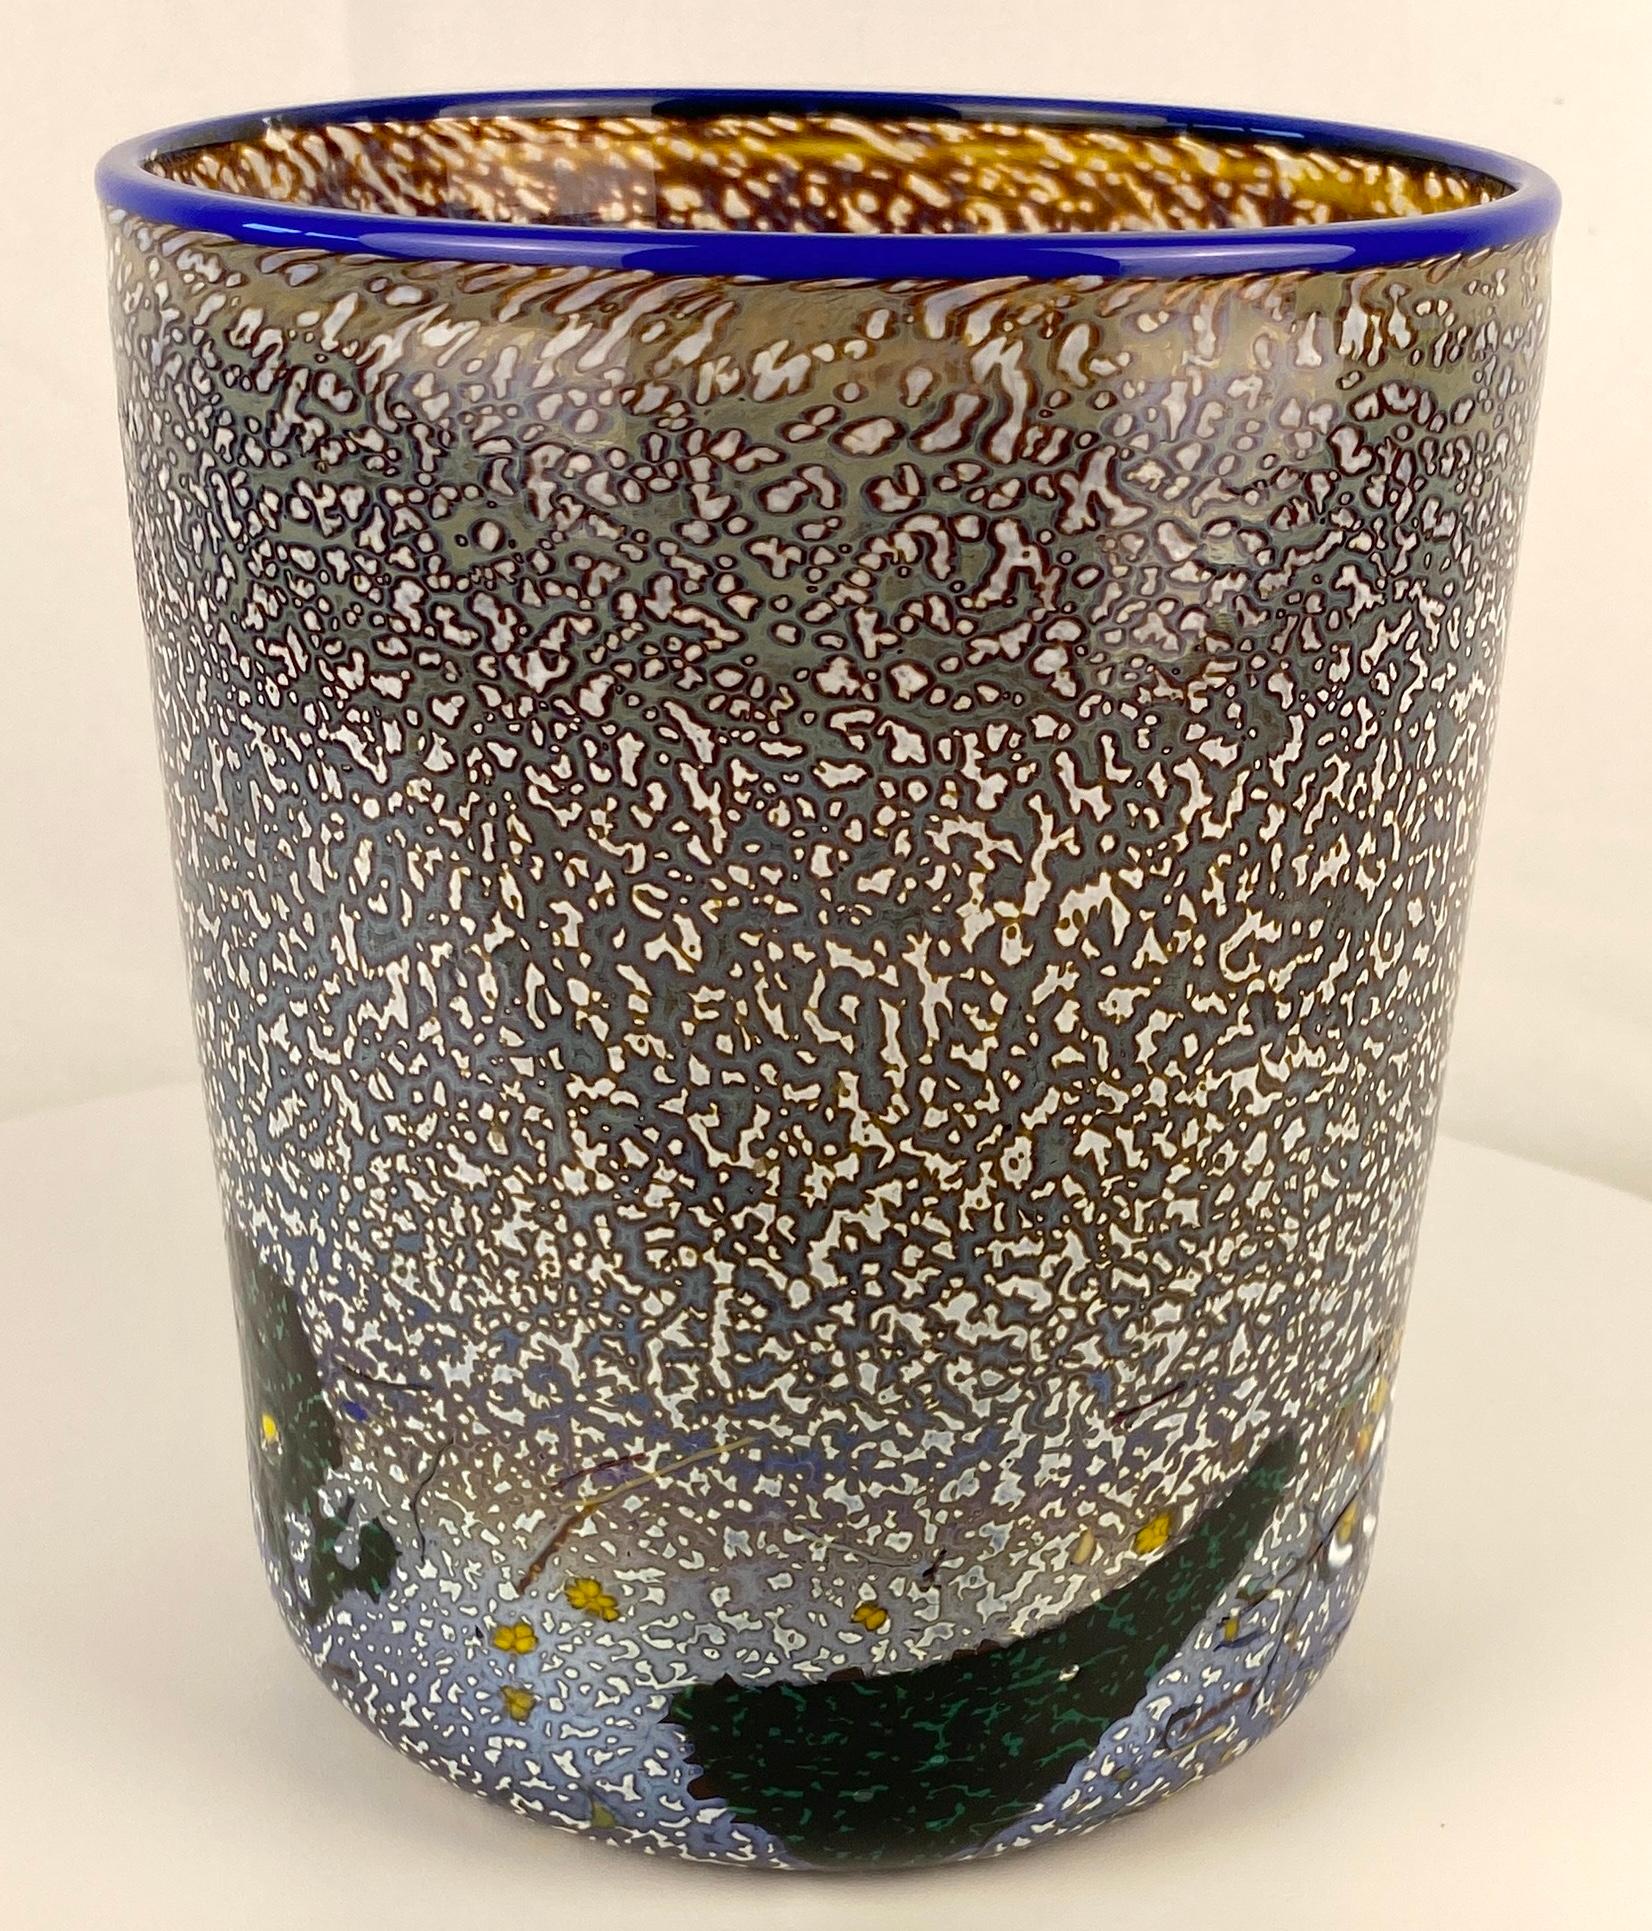 A lovely Kosta Boda glass vase or planter. The specked details makes this glass vase or planter very appealing accentuated by a purplish/blue rim. 
This decorative object is signed by the artist, Bertil Vallien and numbered. 

Place this Kosta Boda